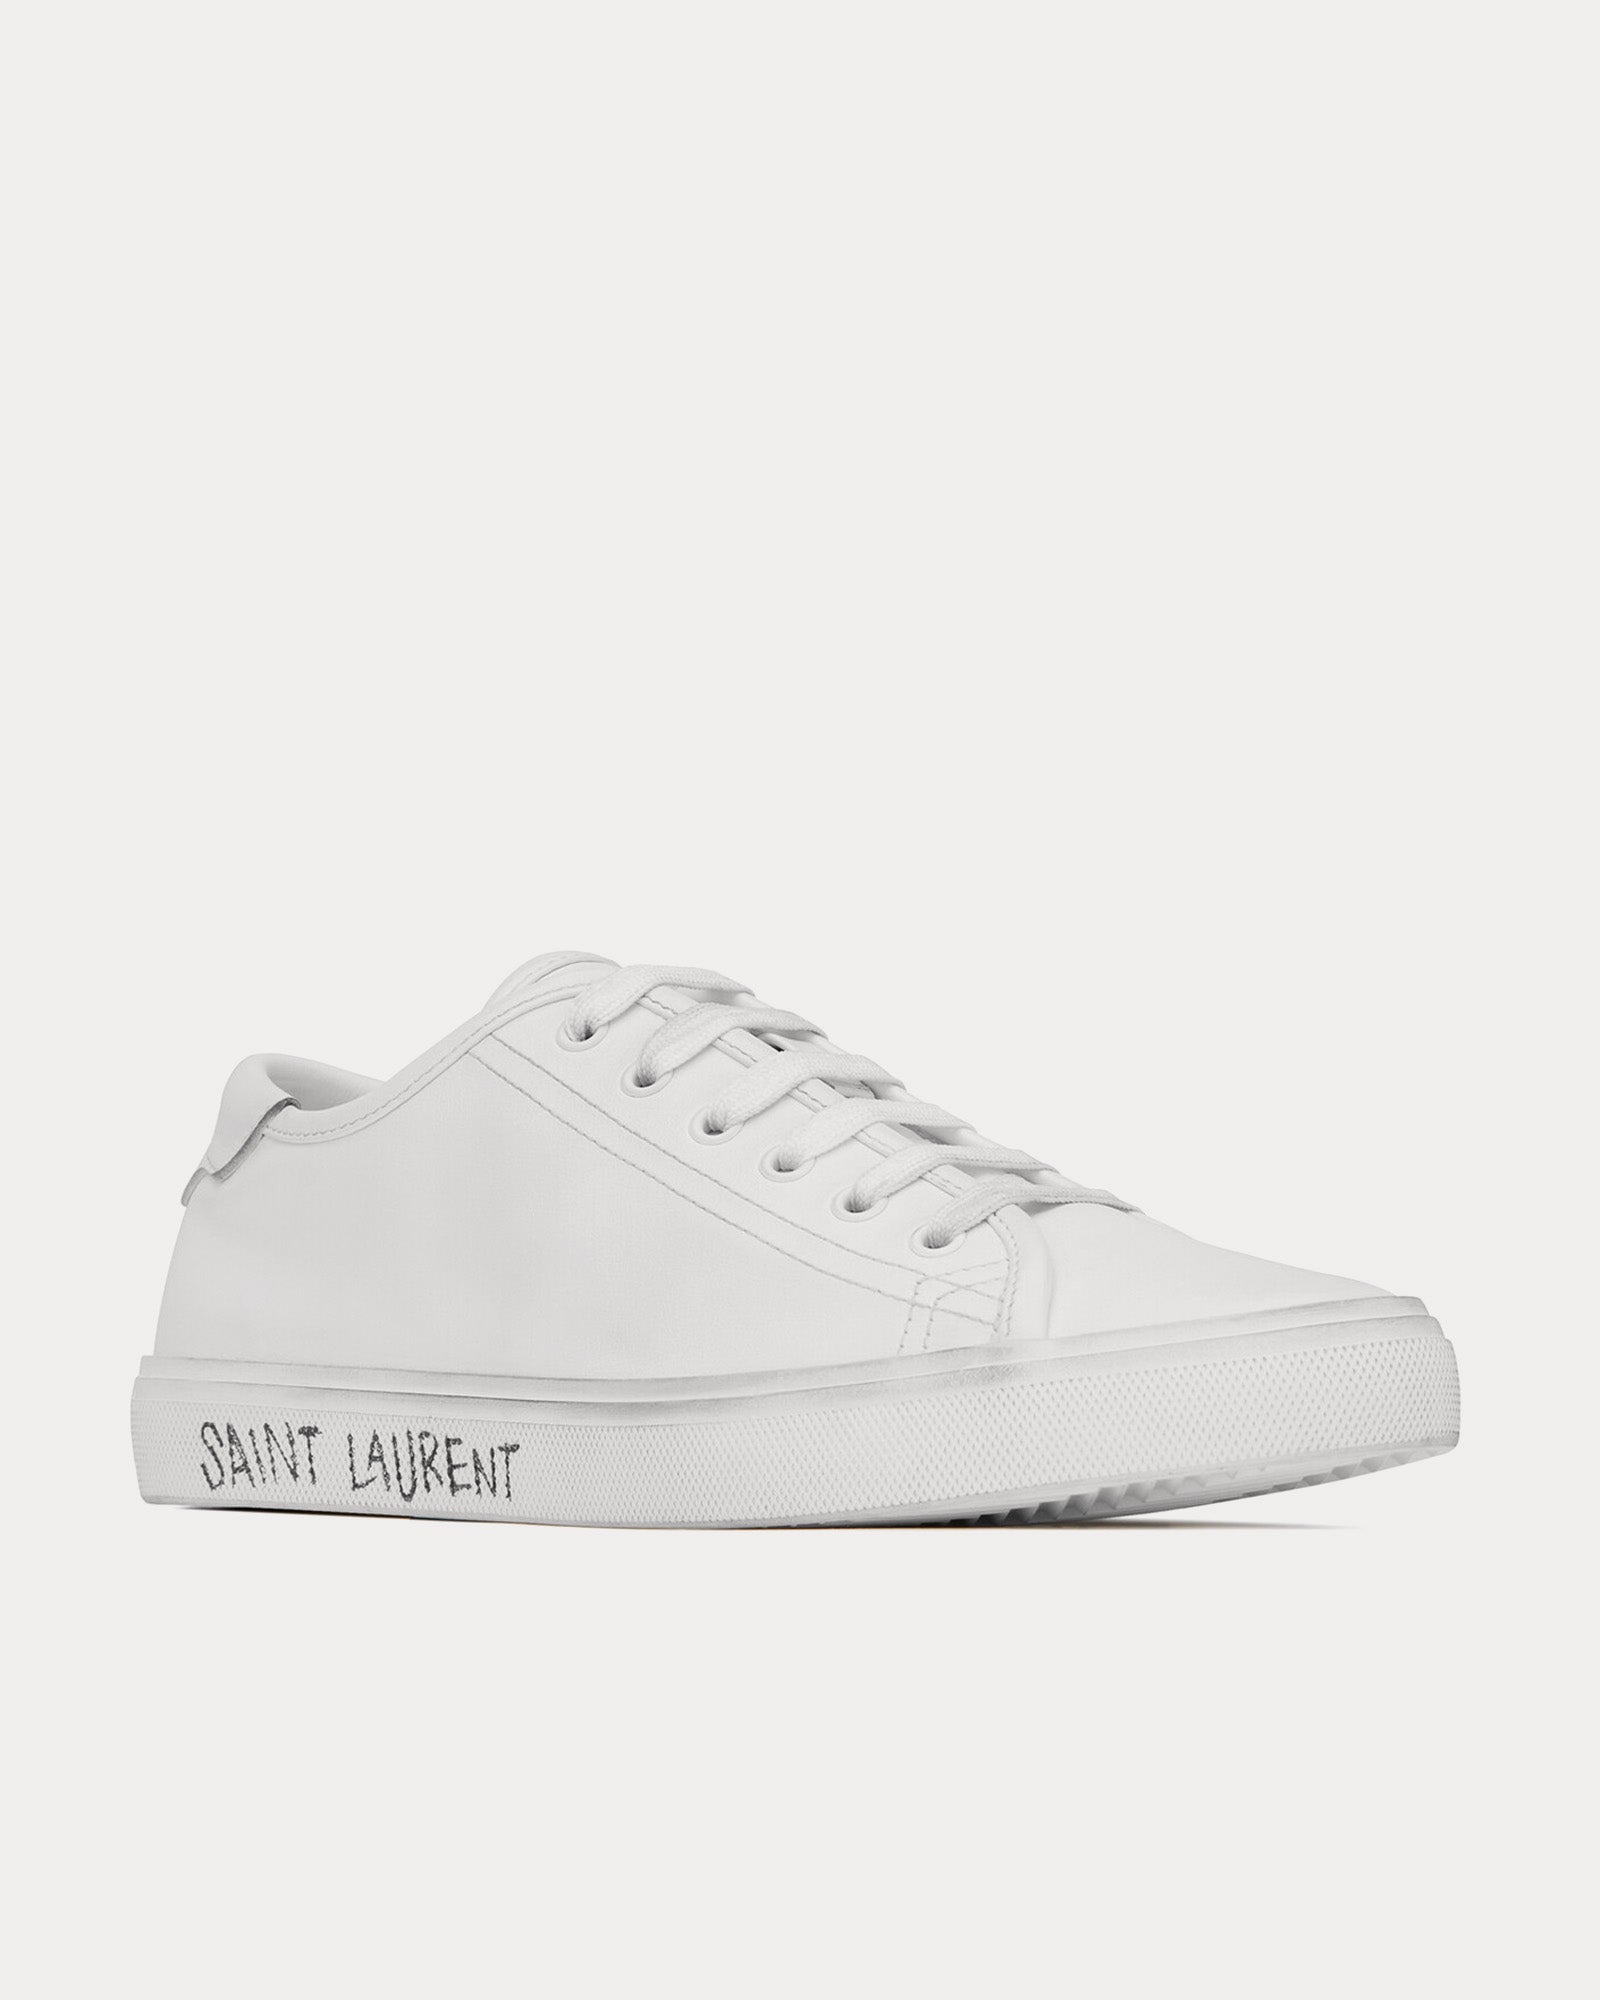 Saint Laurent - Malibu Smooth Leather Optic White Low Top Sneakers